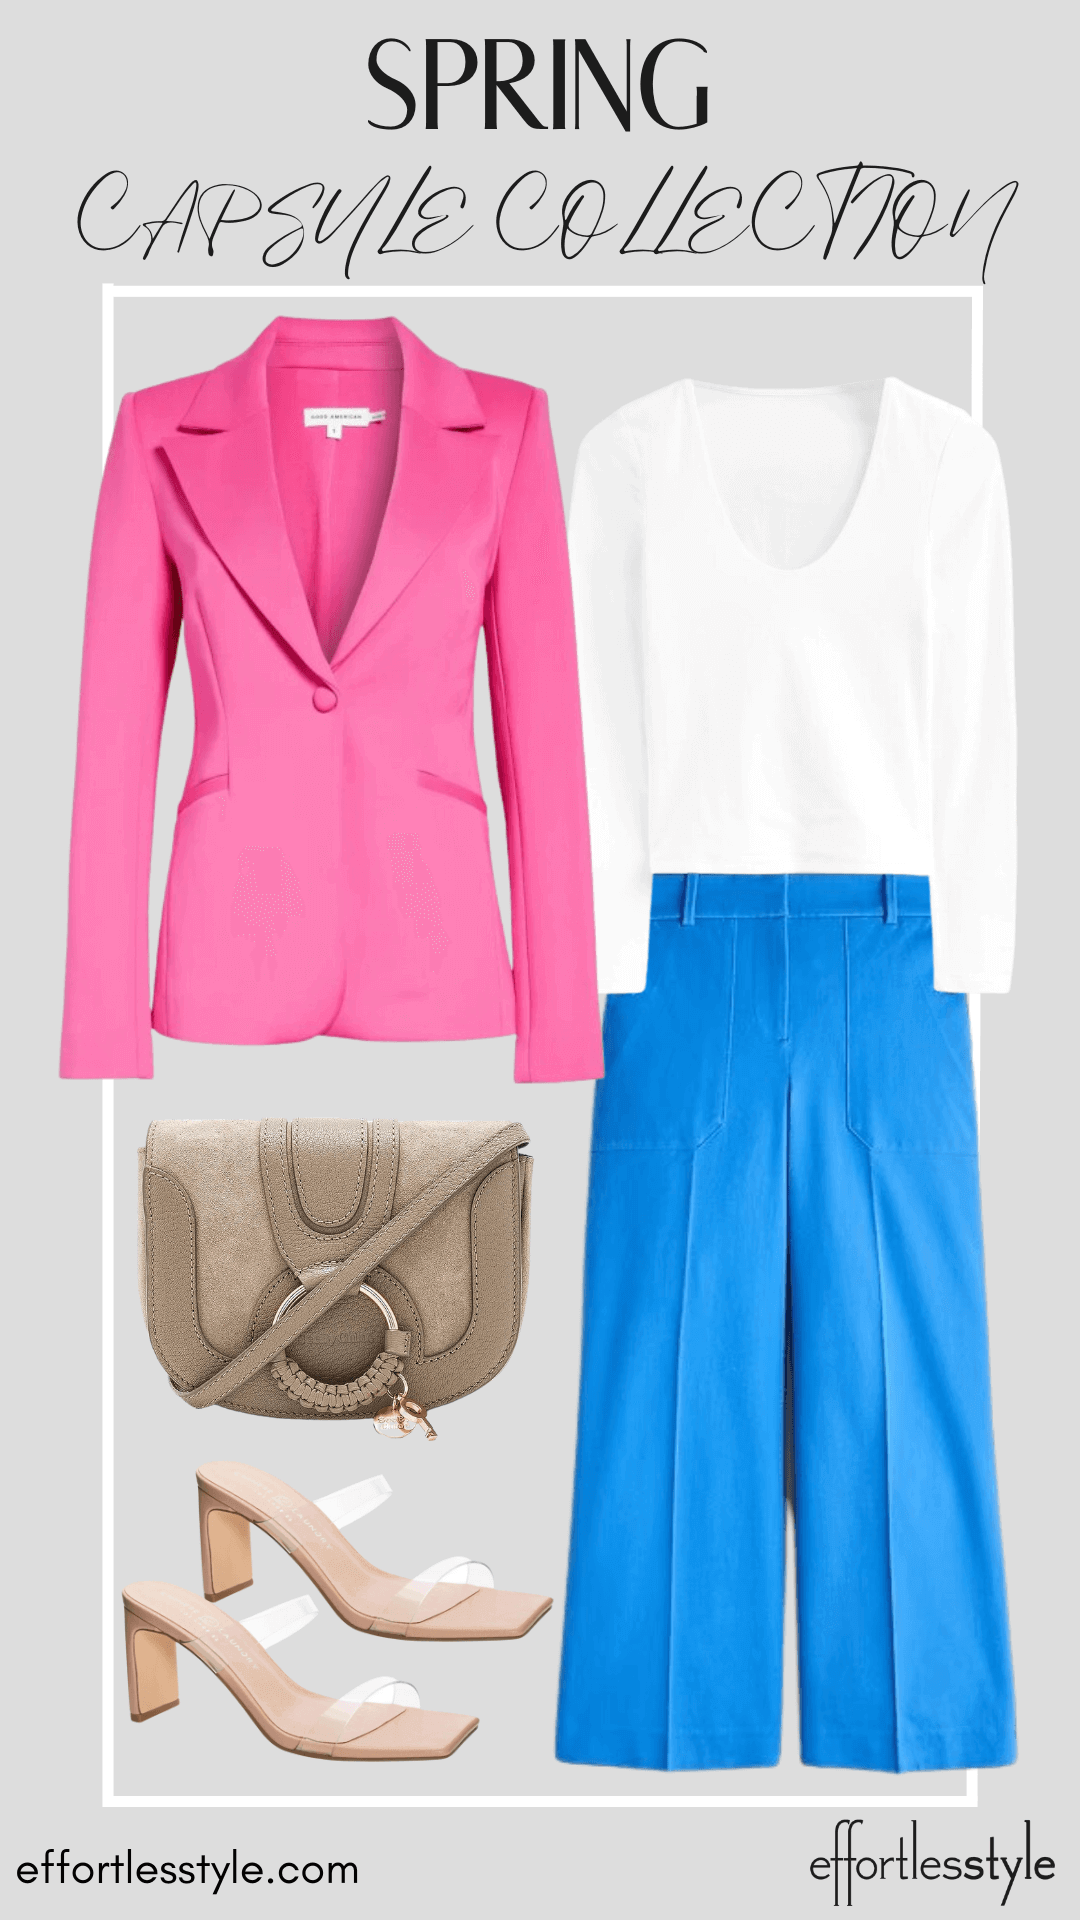 How To Wear Our Spring Capsule Wardrobe - Part 2 Statement Blazer & Long Sleeve Tee & Wide Leg Pants how to color block how to create a colorblocked look this spring Nashville area stylists share must have spring essentials how to create a capsule wardrobe how to wear pink and blue how style wide leg pants for the office